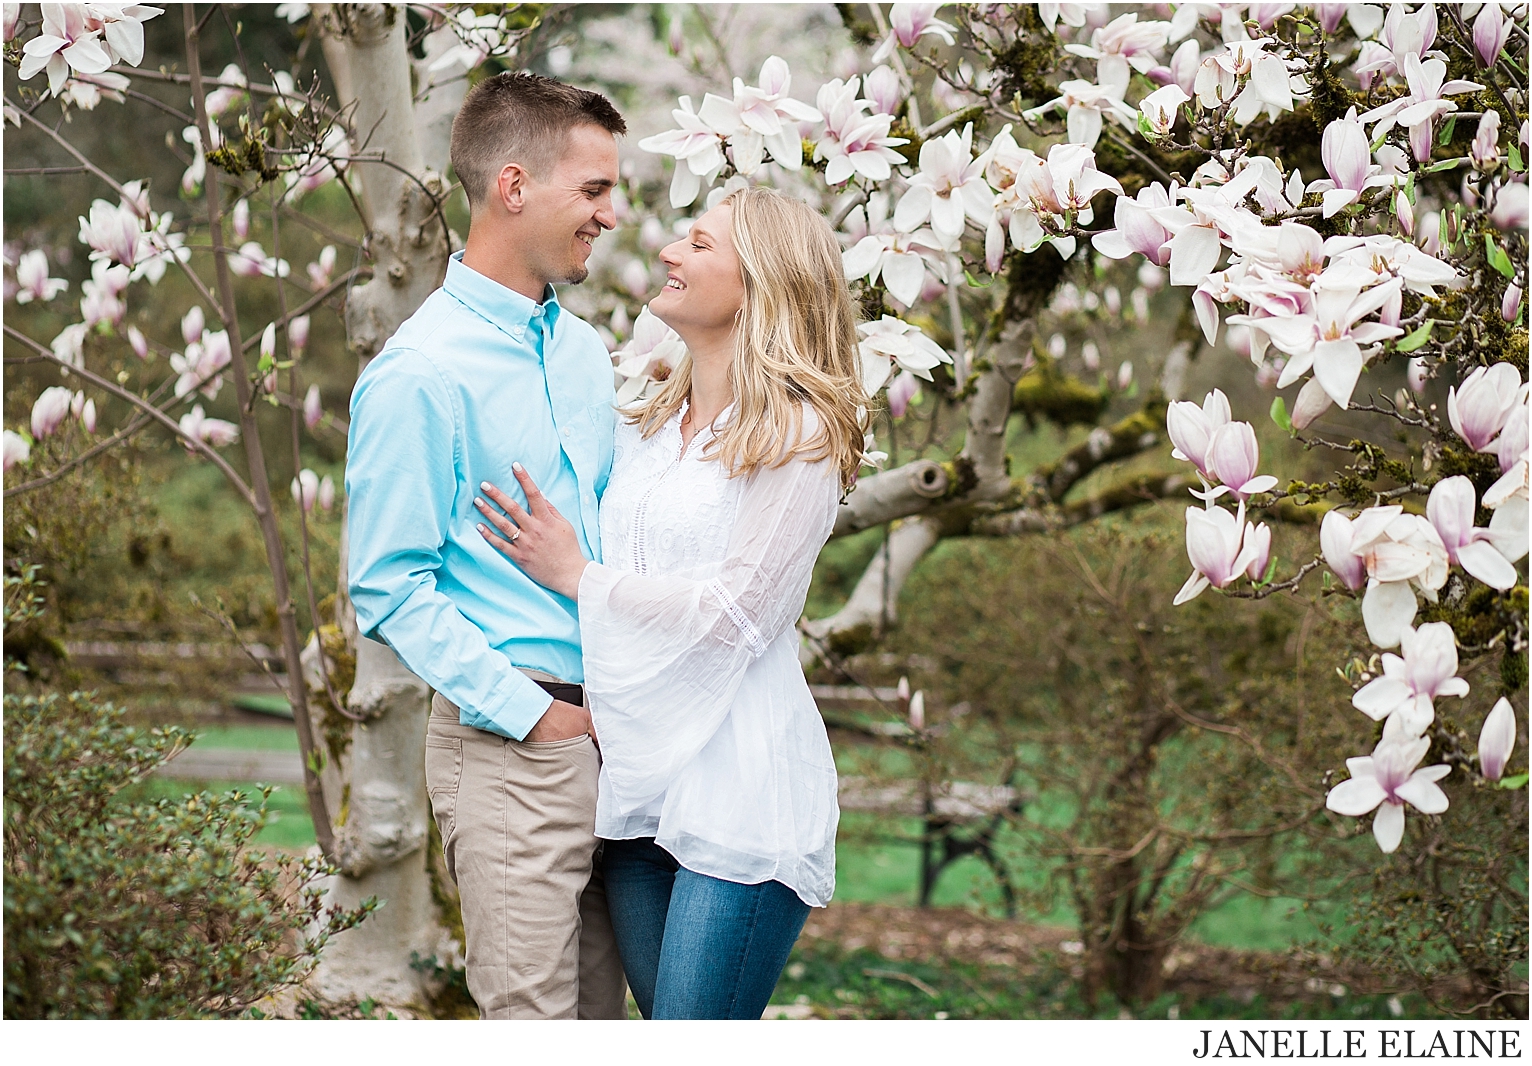 tricia and nate engagement photos-janelle elaine photography-153.jpg